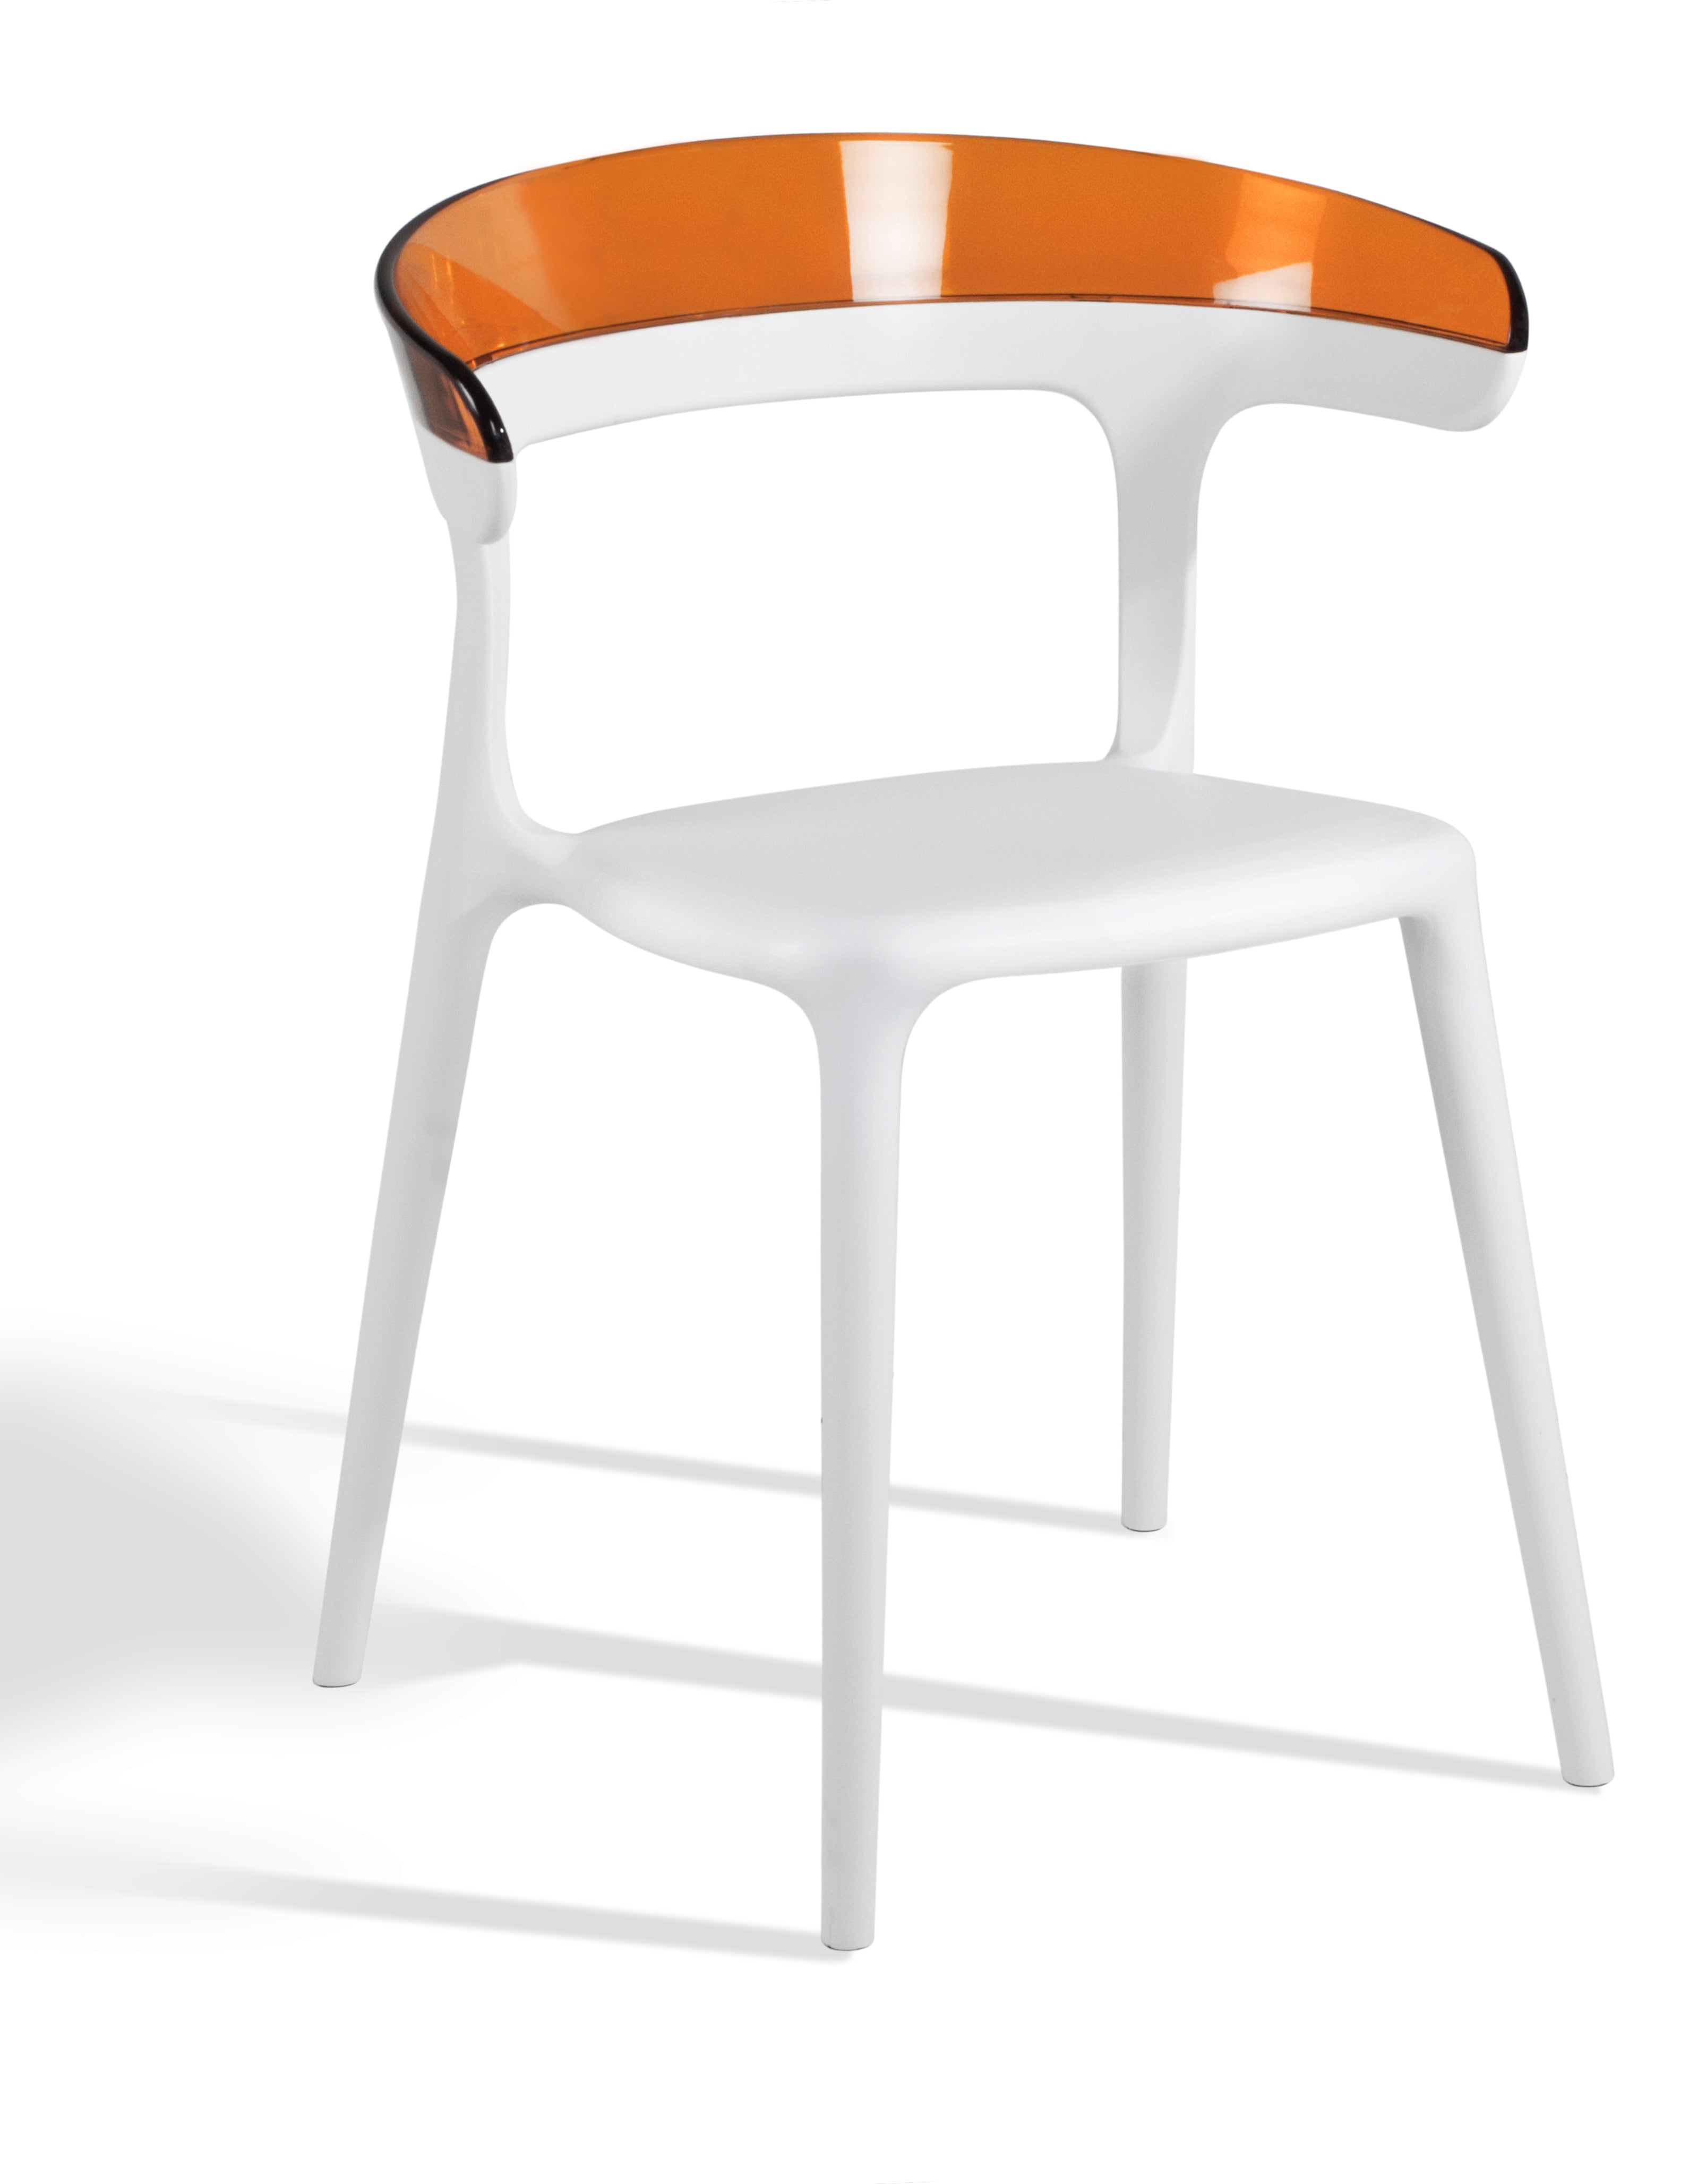 Mia Patio Dining Chair in White and Orange- (Set of 2)